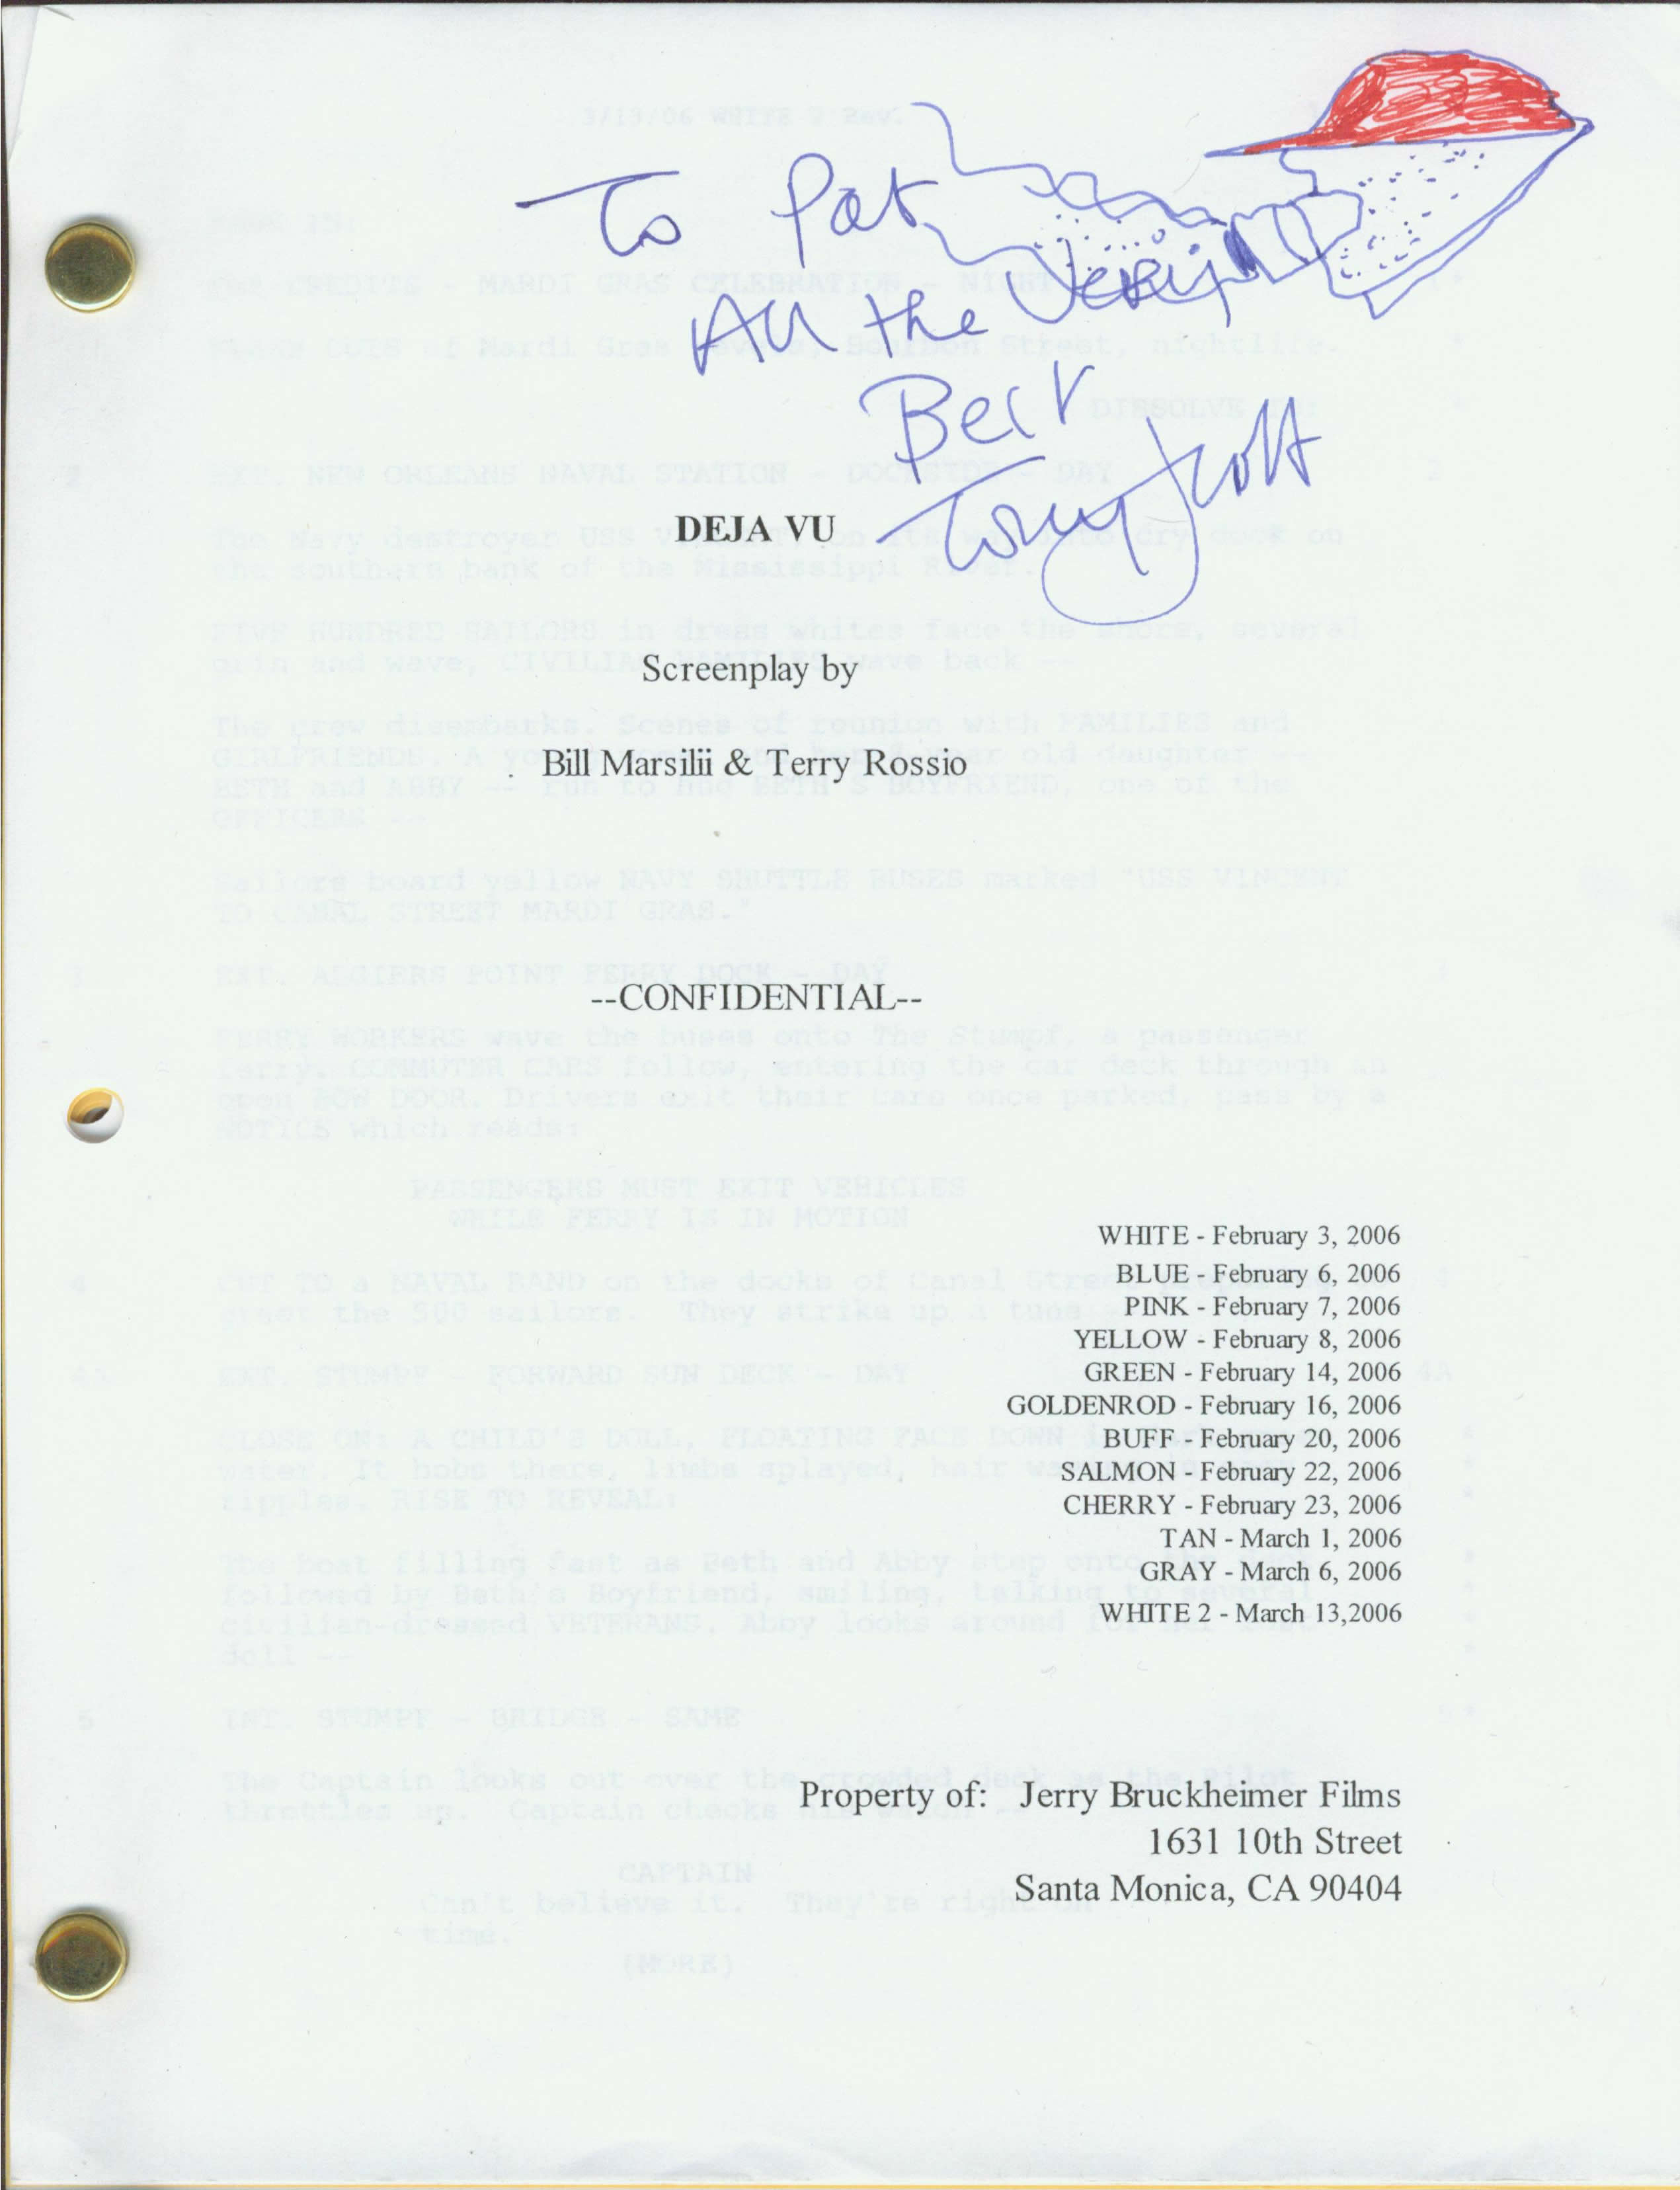 DEJA VU: Patt Noday: a cherished signed script cover from famed genius director, Tony Scott, done while filming the thriller 